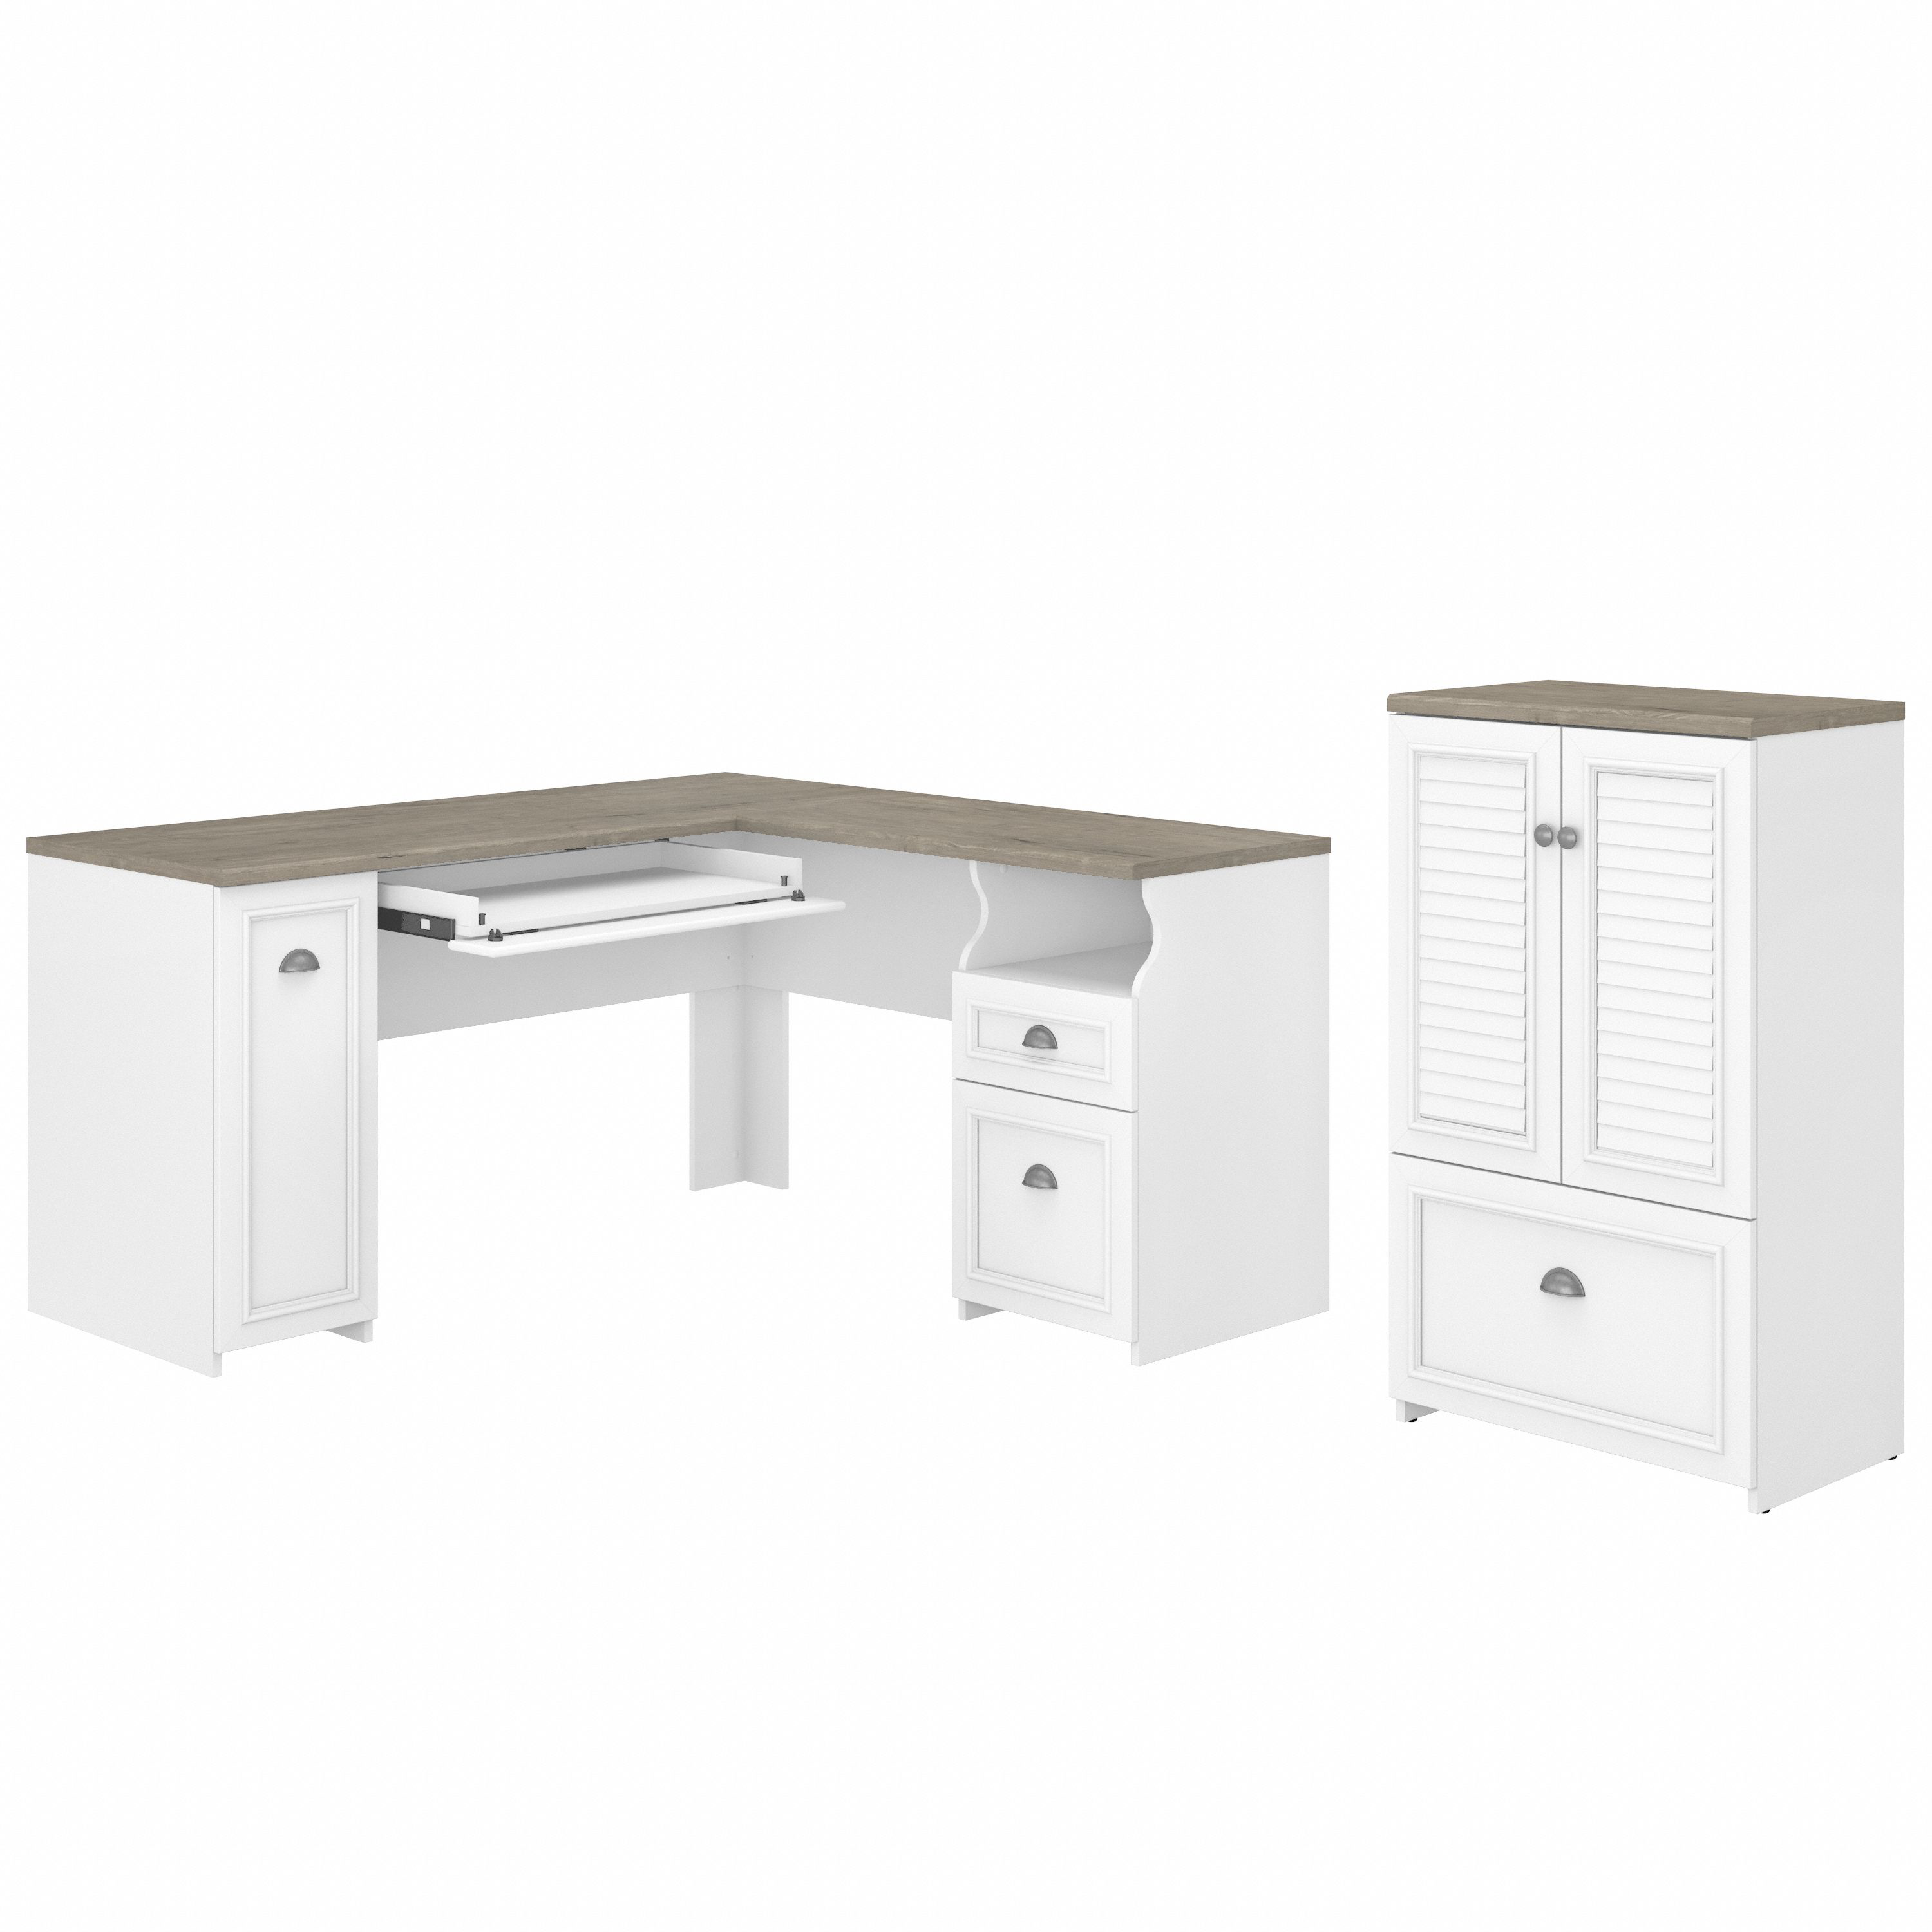 Shop Bush Furniture Fairview 60W L Shaped Desk and 2 Door Storage Cabinet with File Drawer 02 FV009G2W #color_shiplap gray/pure white